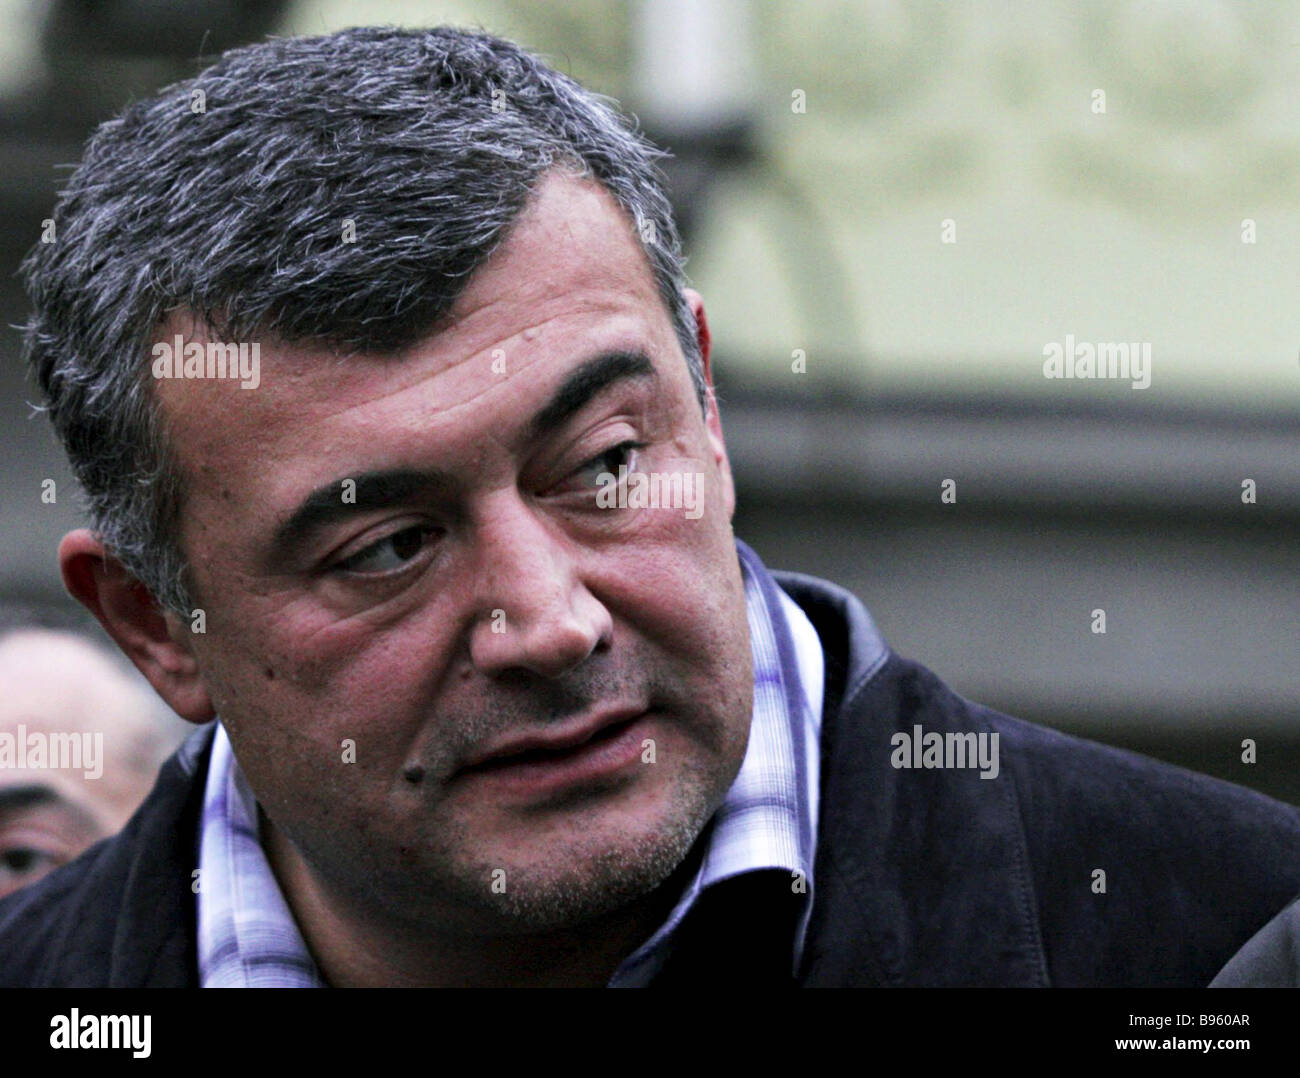 Download preview image - levan-gachechiladze-the-georgian-united-opposition-s-presidential-B960AR